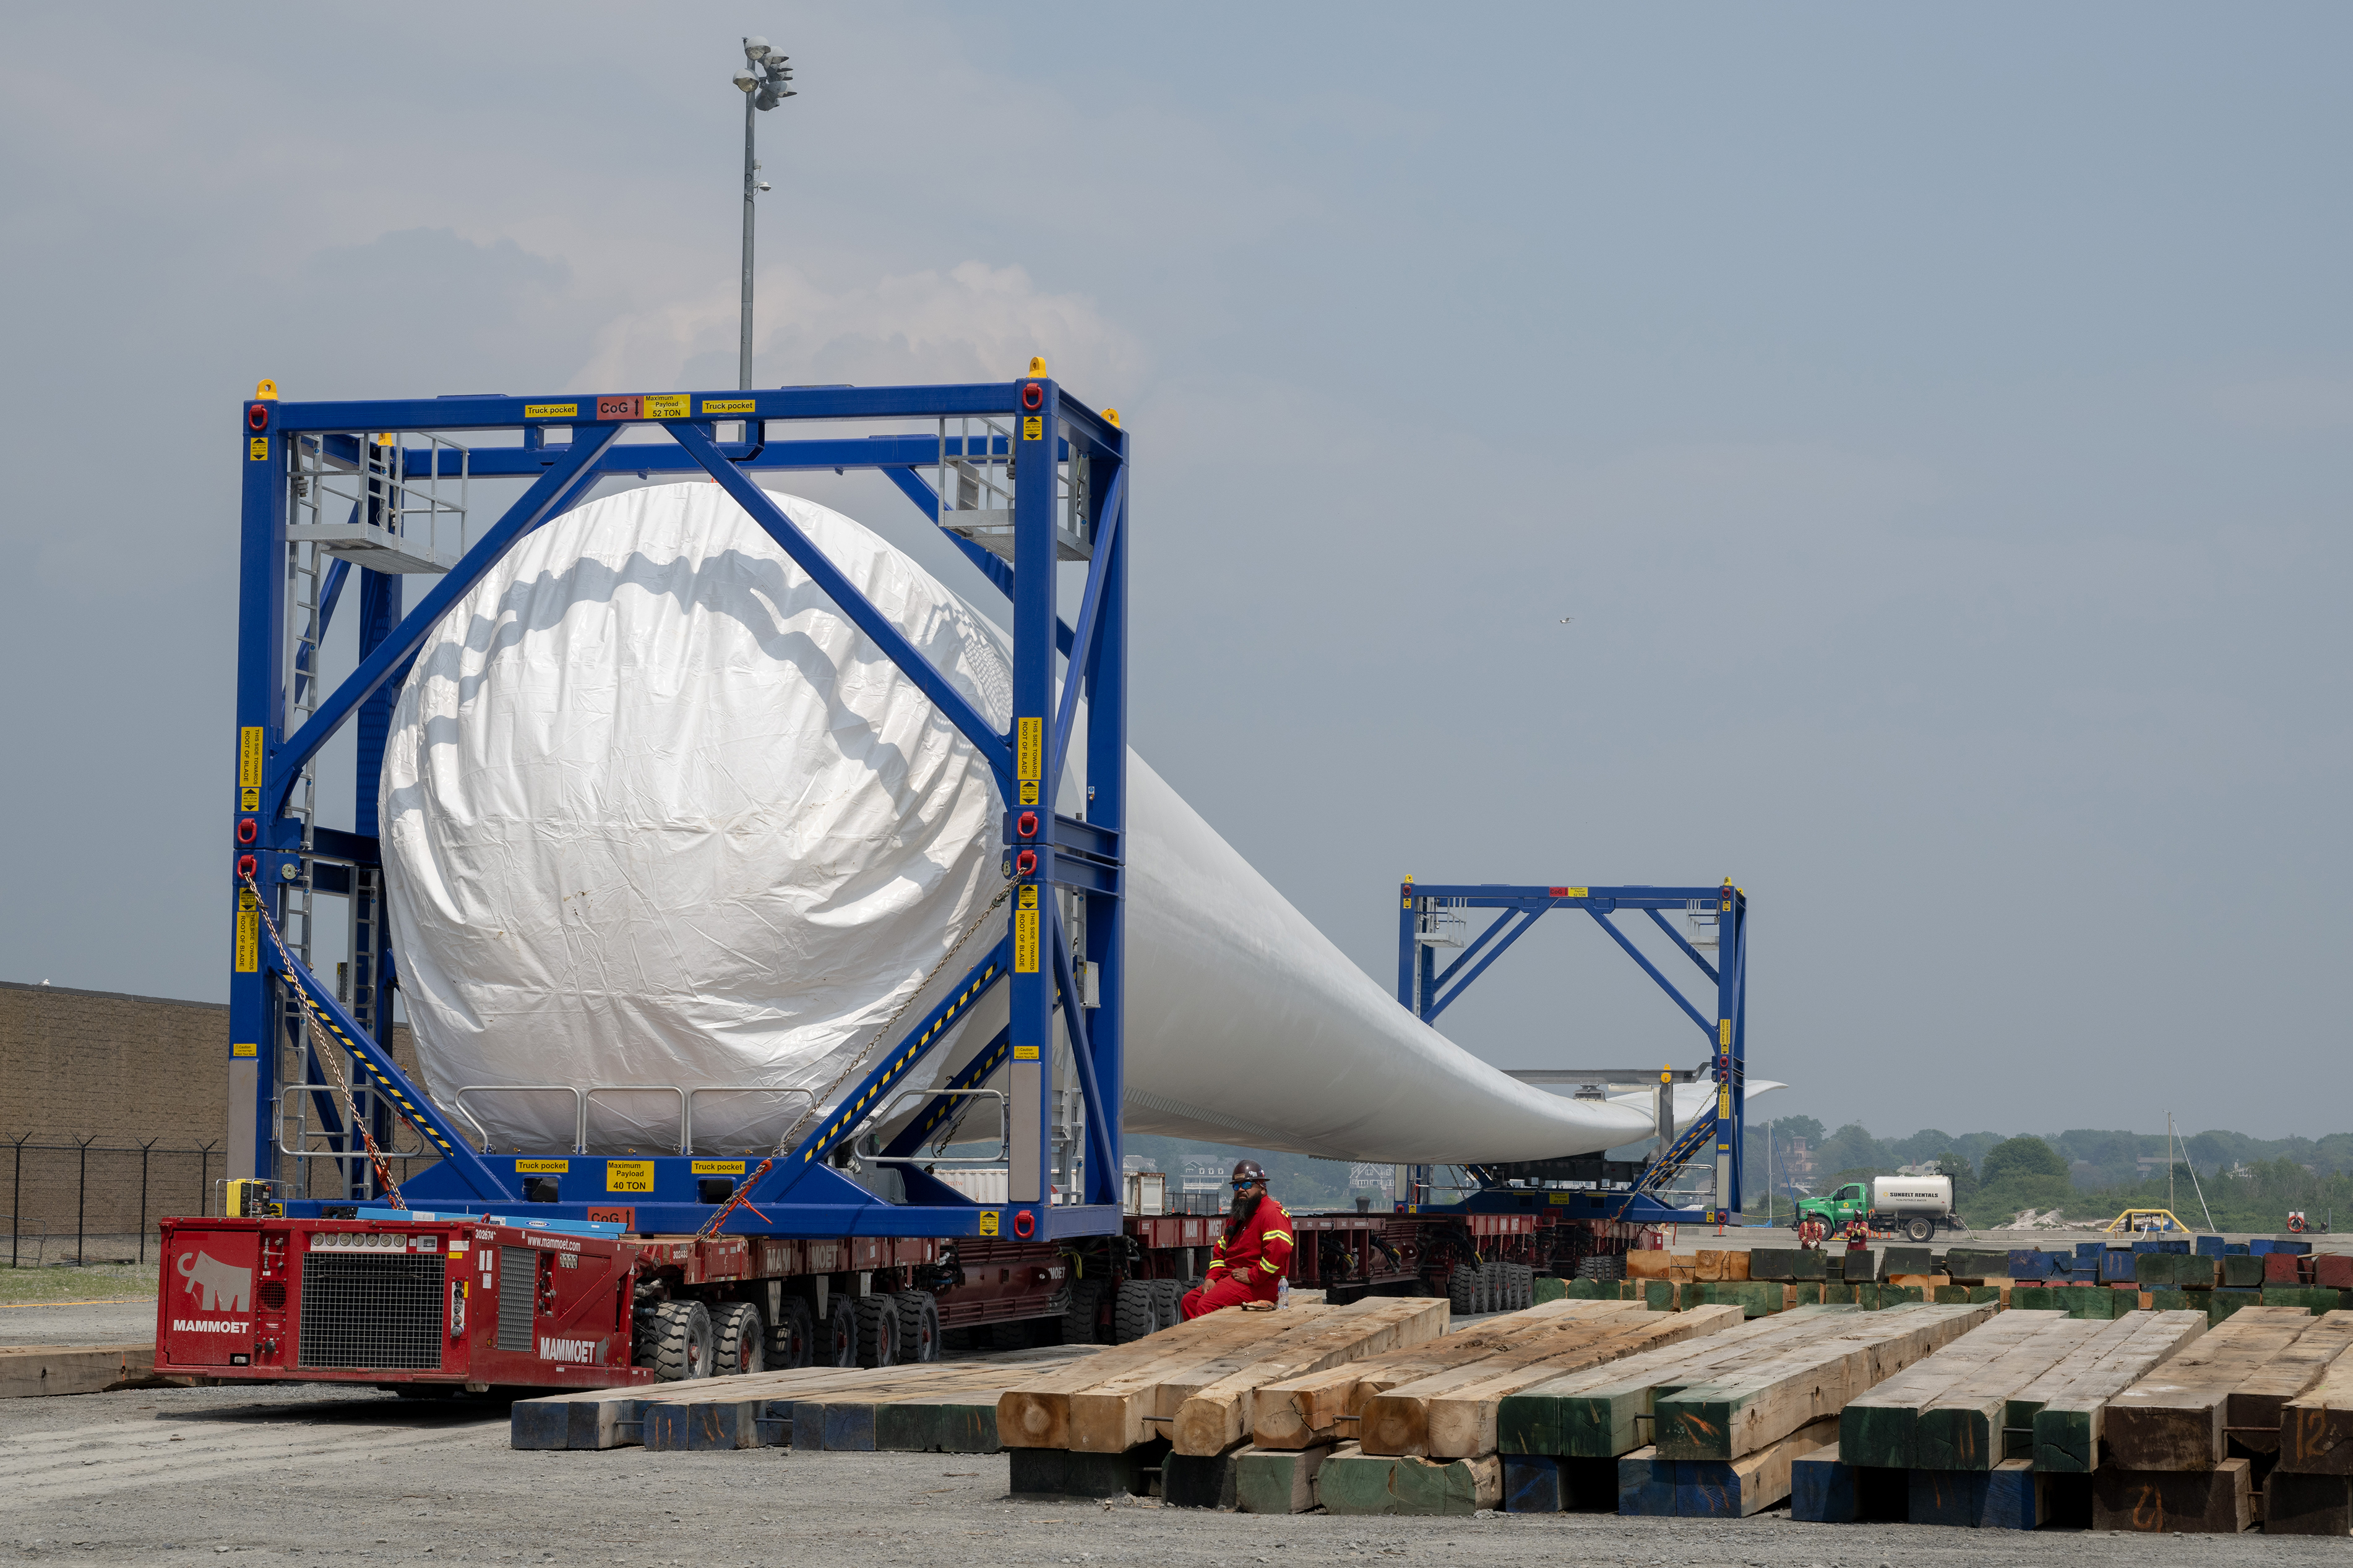 A view down the length of a massive white wind turbine blade held by two large transport devices on the ground as a worker in red looks on.